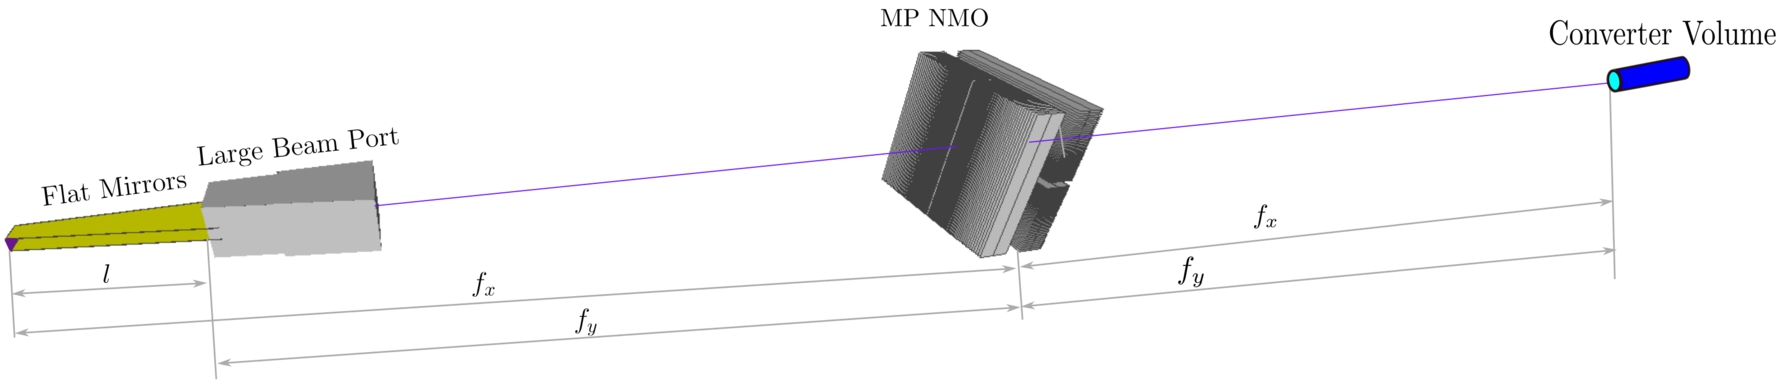 Schematic of the proposed neutron optical delivery system for the large beam port at the ESS. The parameters quoted below have been used for the McStas simulations. The distance between the moderator, at left, and the converter entrance, at right, is 35 m. Neutrons are emitted at the LD2 moderator surface from an area wmod×hmod, where the physical height hmod=24cm. And width wmod=40cm, respectively. Neutrons are initially guided in the vertical direction by two parallel, flat mirrors that end at the LBP at 2.67 m the beam is imaged onto the entry of the converter by two planar elliptic NMO that consist of mirrors of lengths Lmir=0.5m. The semi-minor axis of the outermost mirror of both devices is b0,x=b0,y=1.85m. The vertically focusing NMO has a focal length of fy=16.165m and is placed halfway between converter and the end of the flat mirrors, whereas the horizontally focusing NMO (fx=17.5m) is centred between the converter and the moderator. All mirrors of the NODS are coated with the same broadband m=6 supermirror.